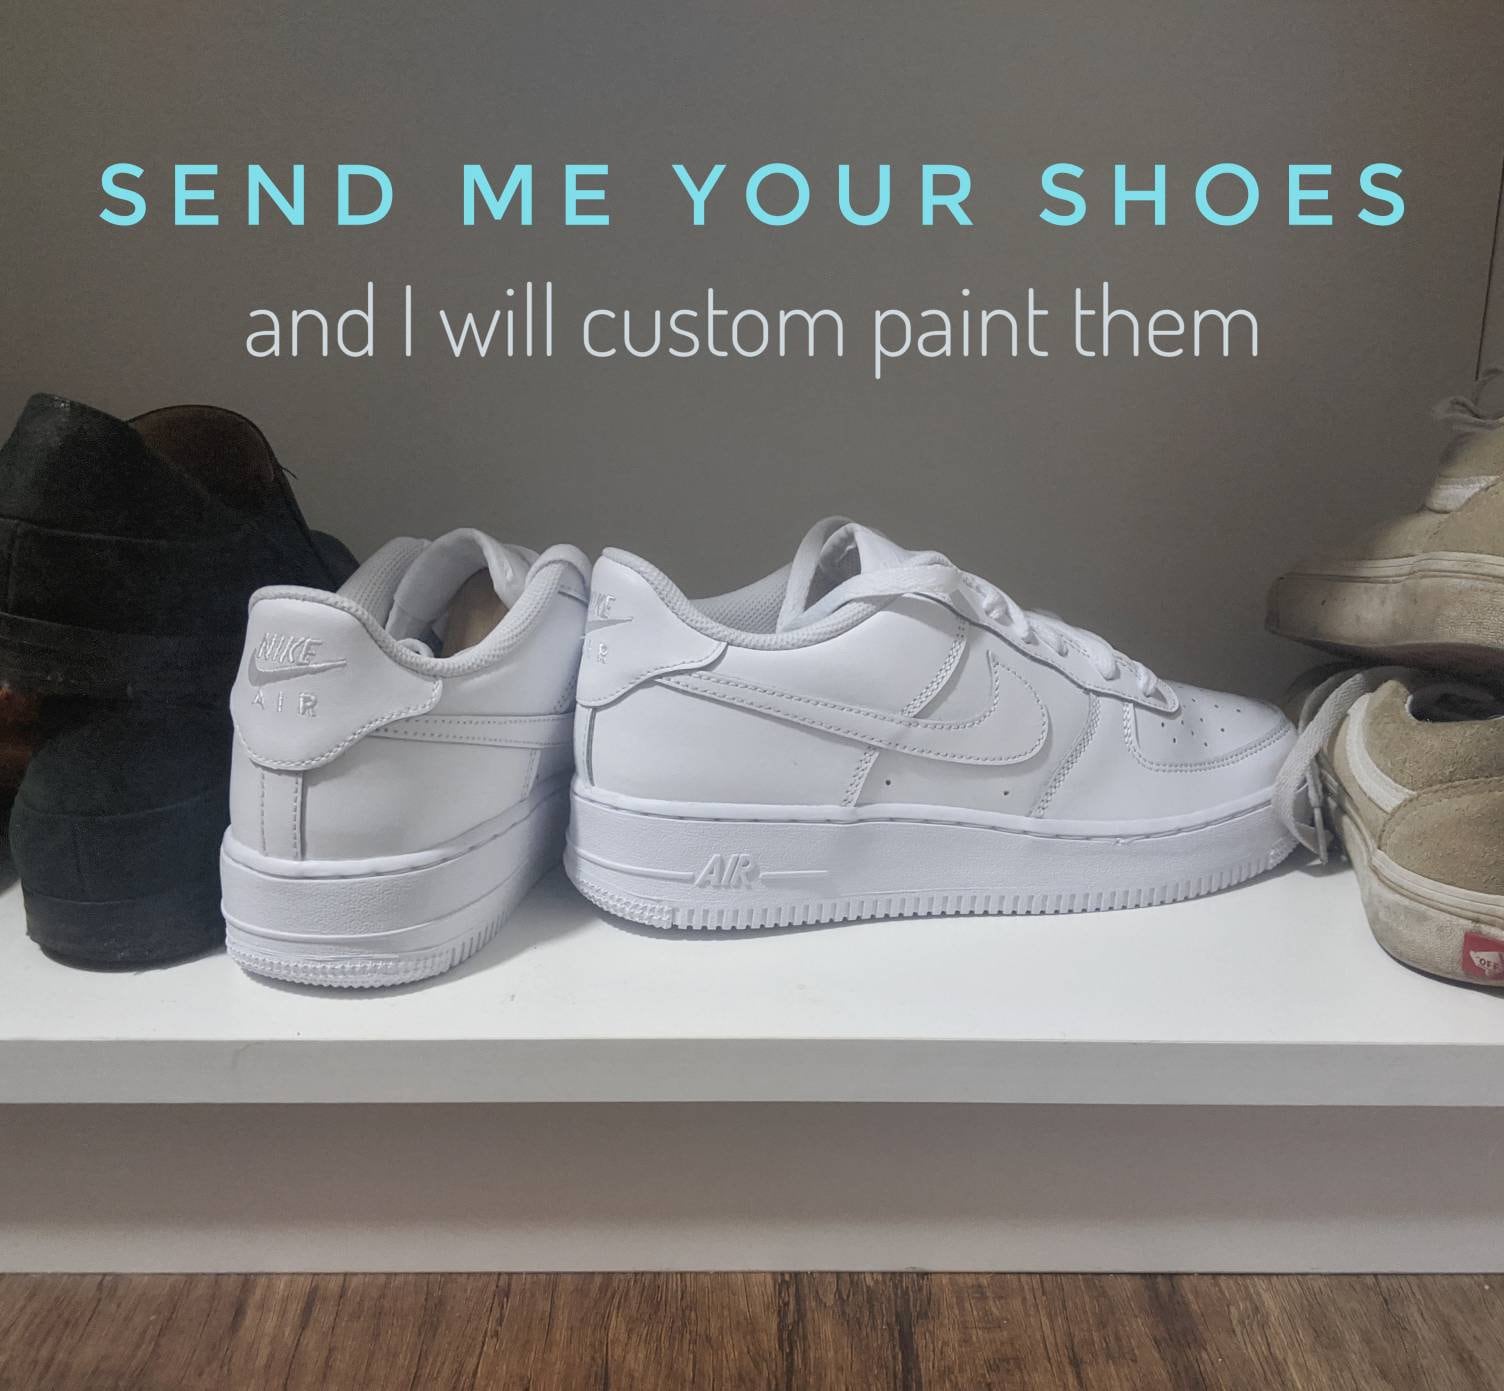 Can you Clean Custom Shoes